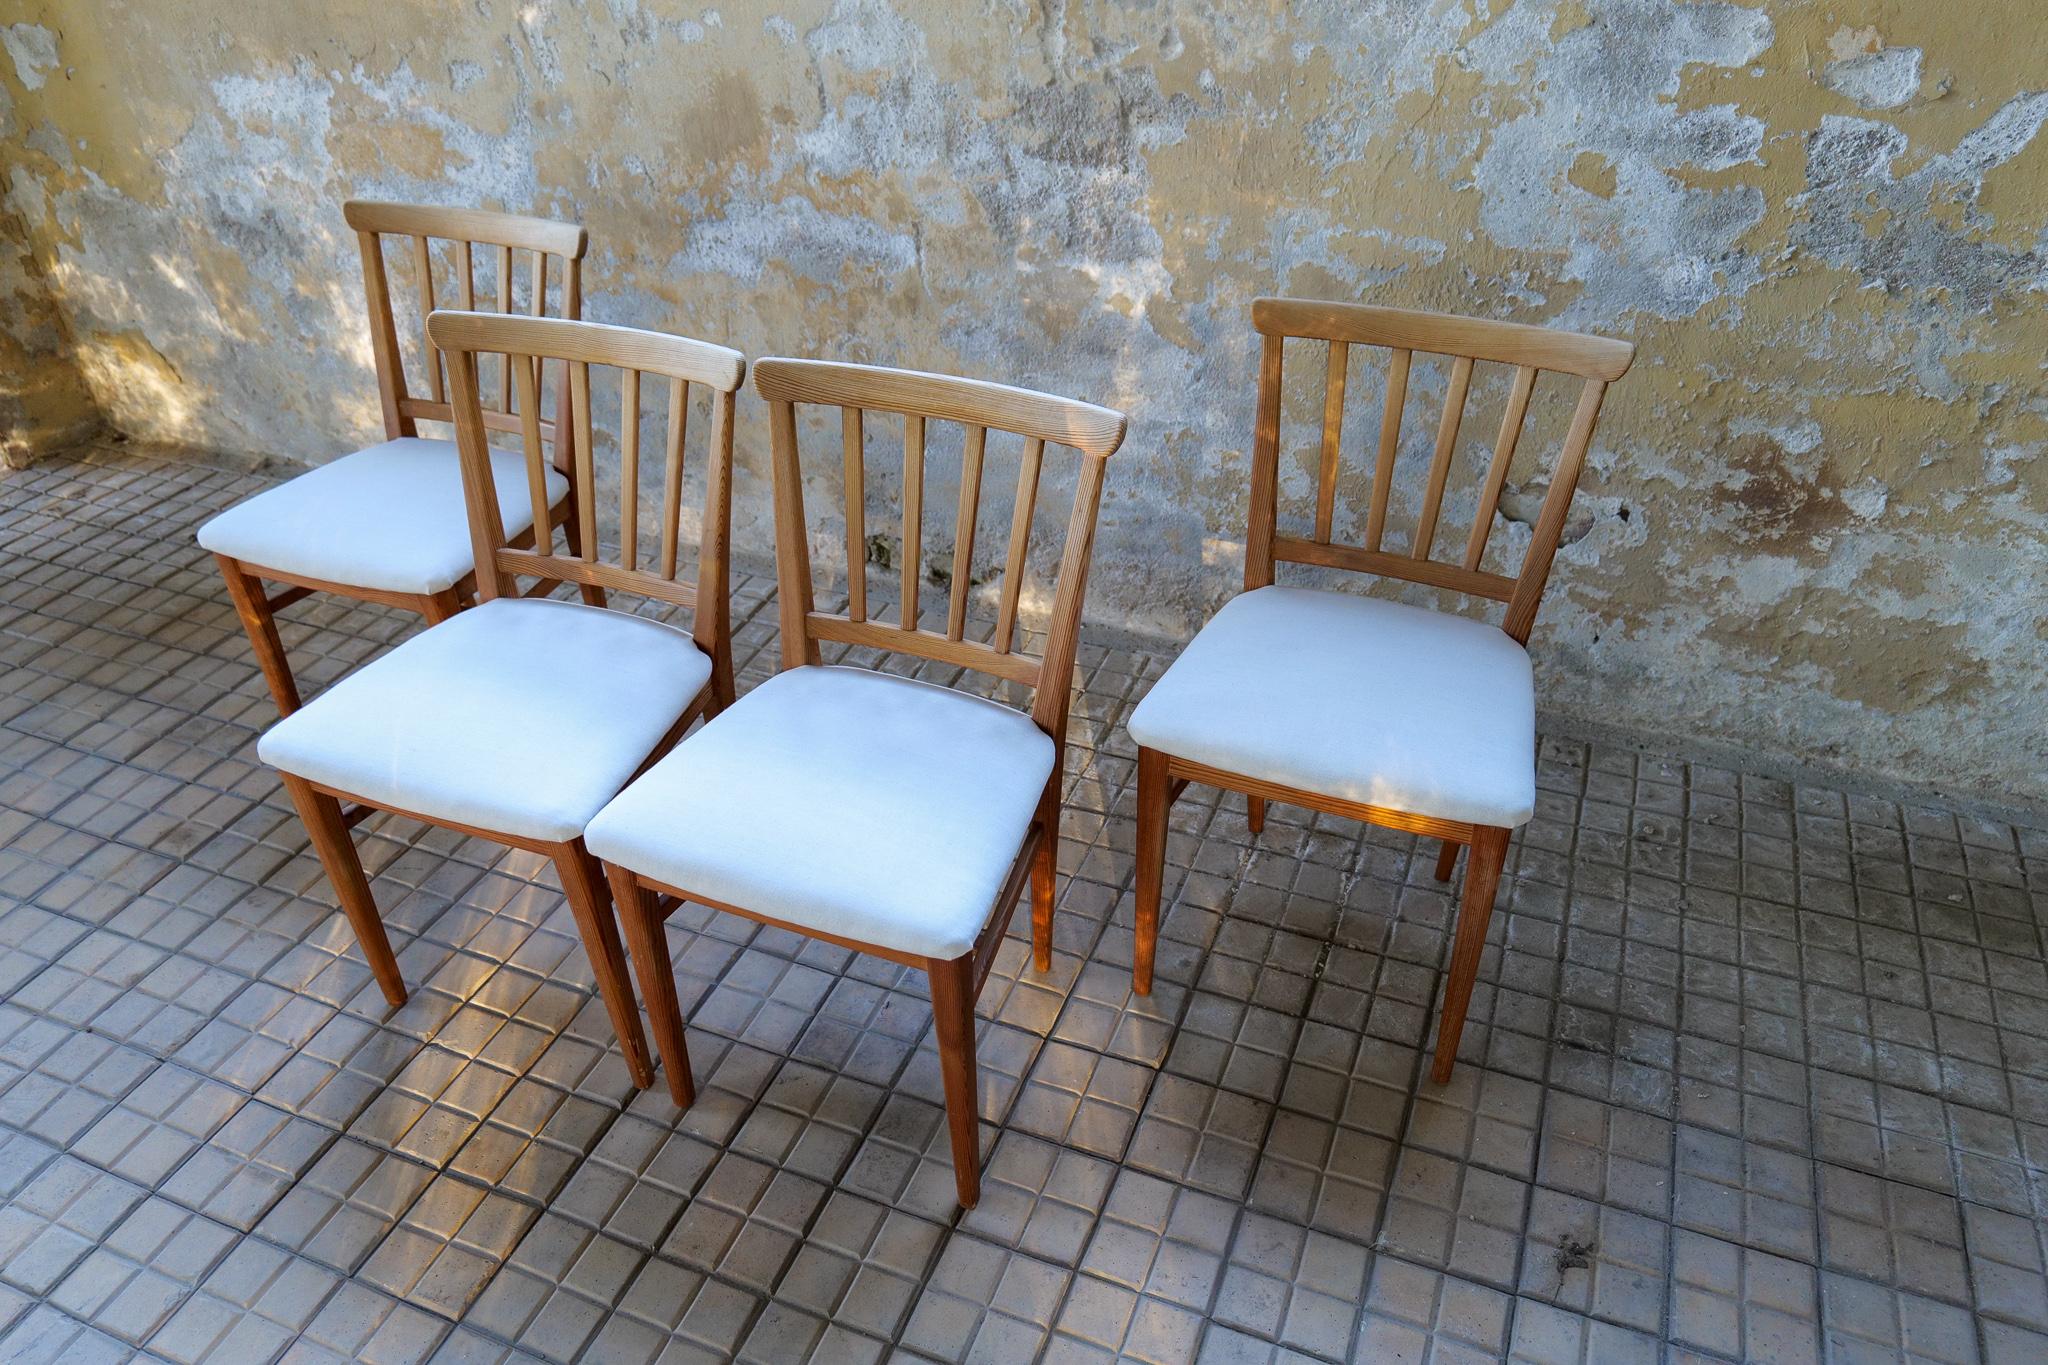 Mid-20th Century Midcentury Set of 4 Carl Malmsten Chairs Dining in Pine, Sweden, 1940s For Sale